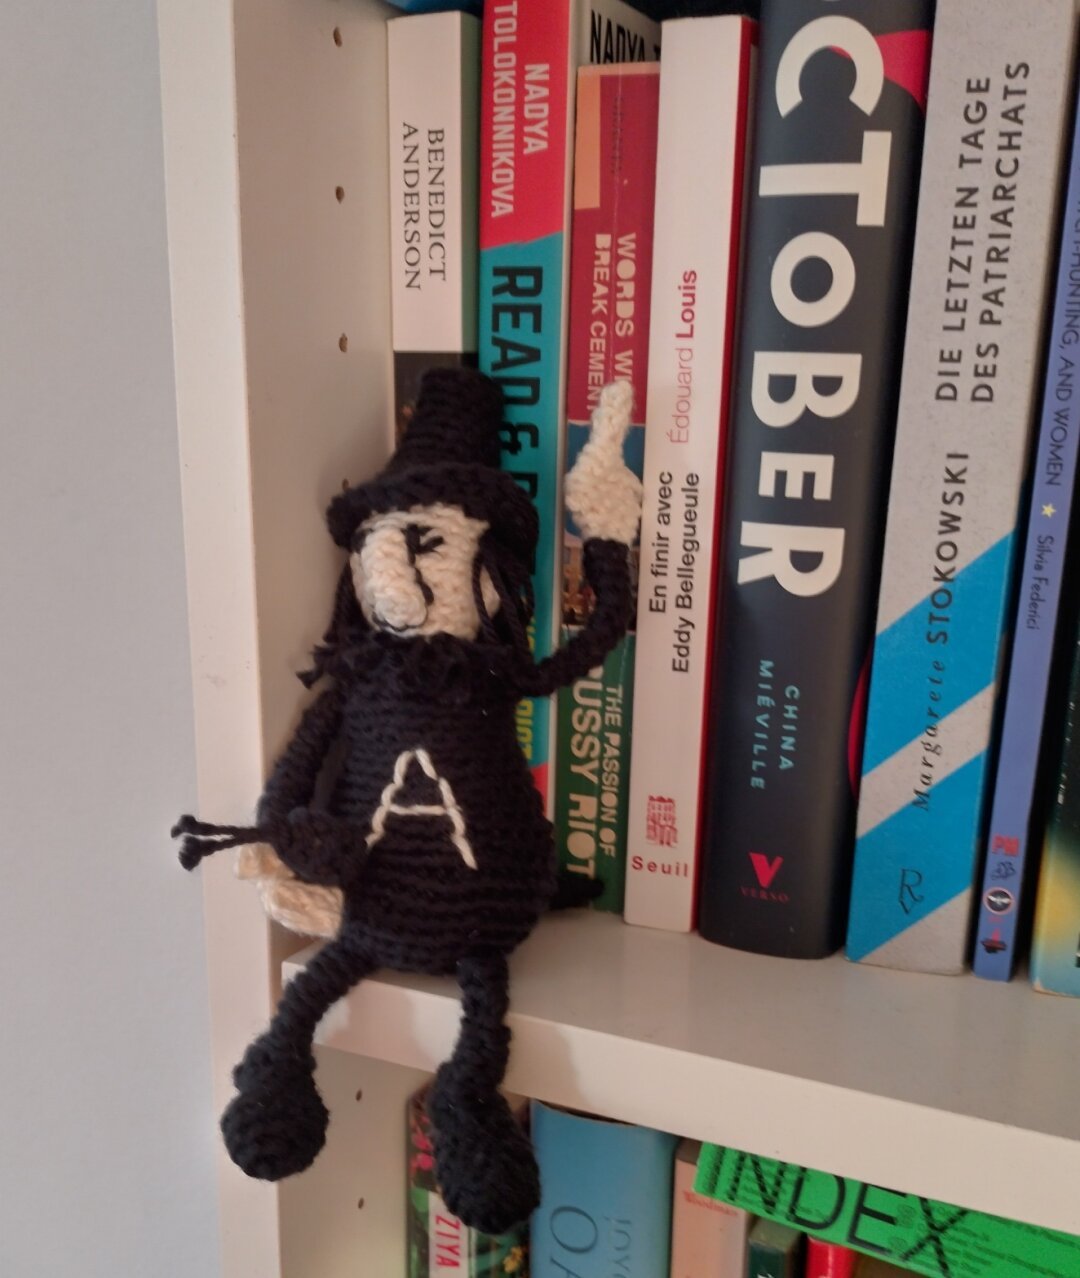 an image or two from my Pixelfed, shows a crocheted character looking like Anarchik, the Italian anarchist cartoon